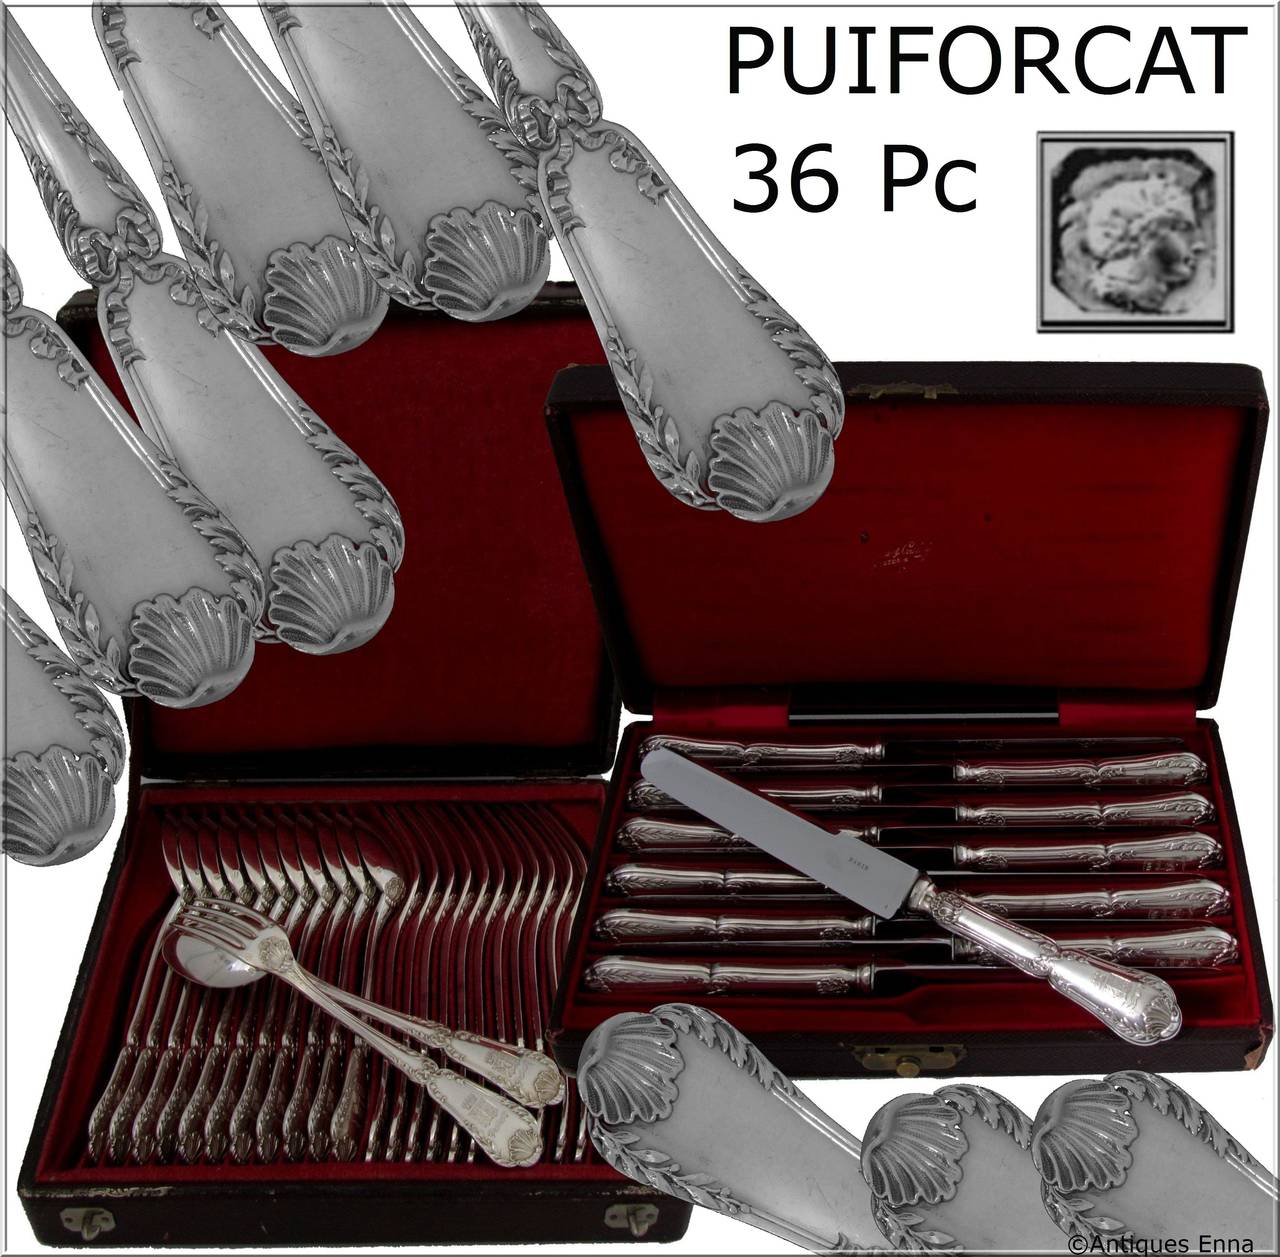 Puiforcat French Sterling Silver Dinner Flatware Set 36 pc w/Chests Louis XVI

Head of Minerve 1 st titre for 950/1000 French Sterling Silver guarantee

A rare flatware with foliate, shell and ribbon decoration. There are plate of the Maison